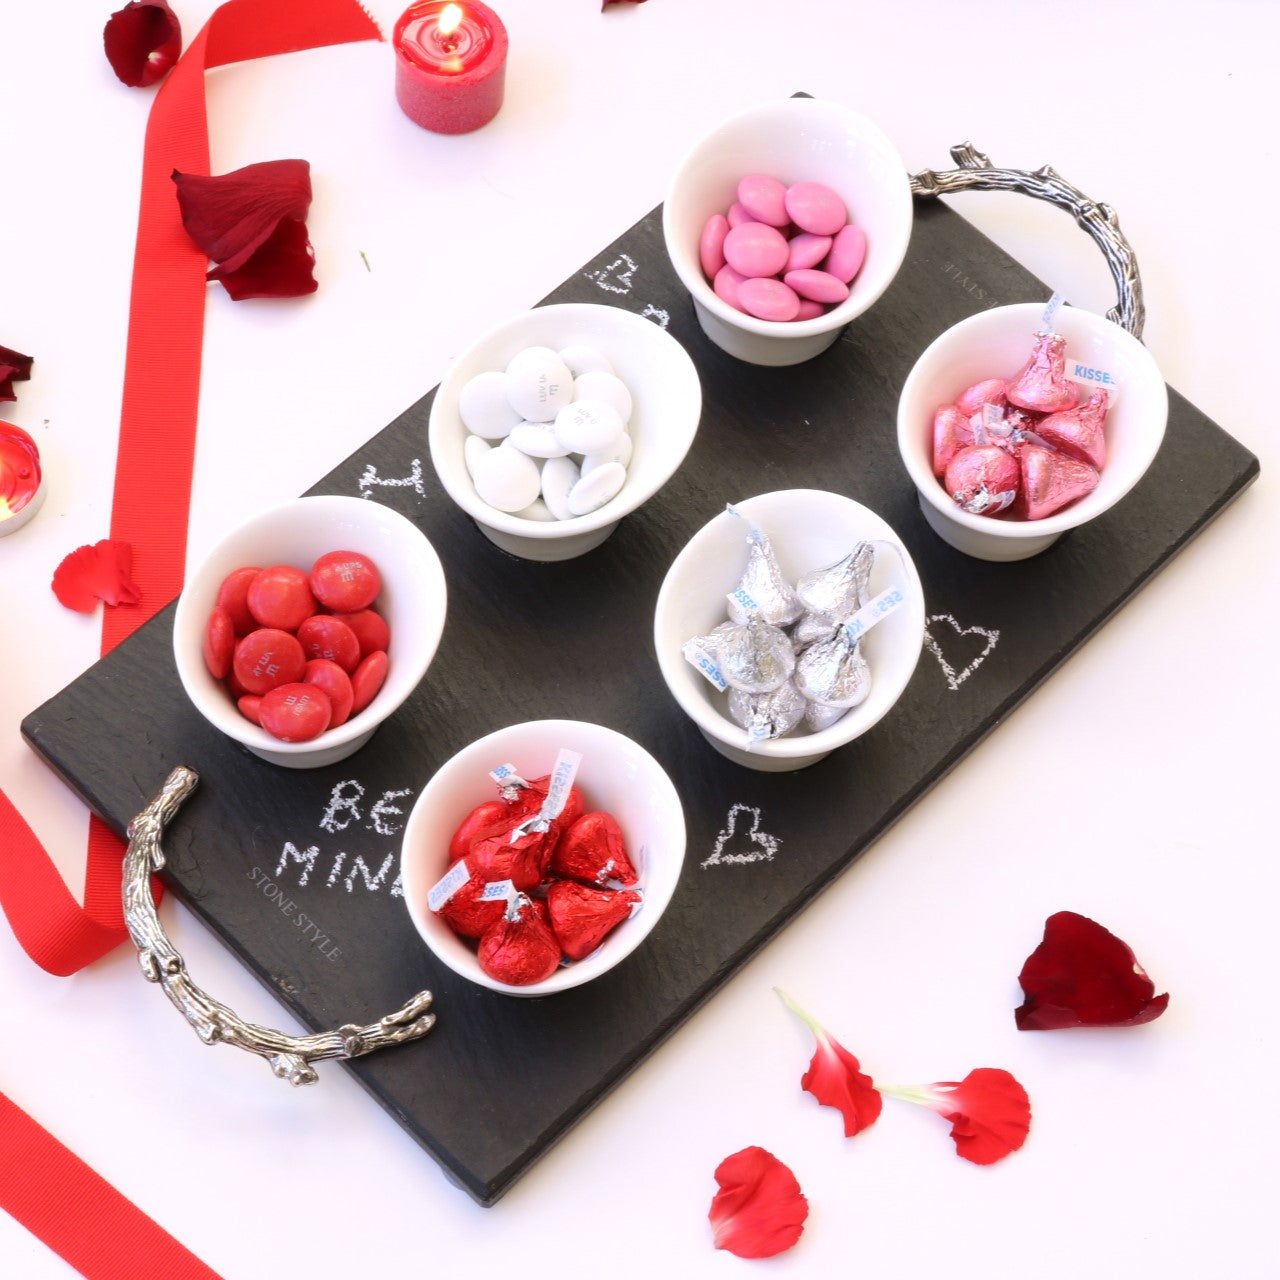 Romantic Valentine Gifts For Your Sweetheart